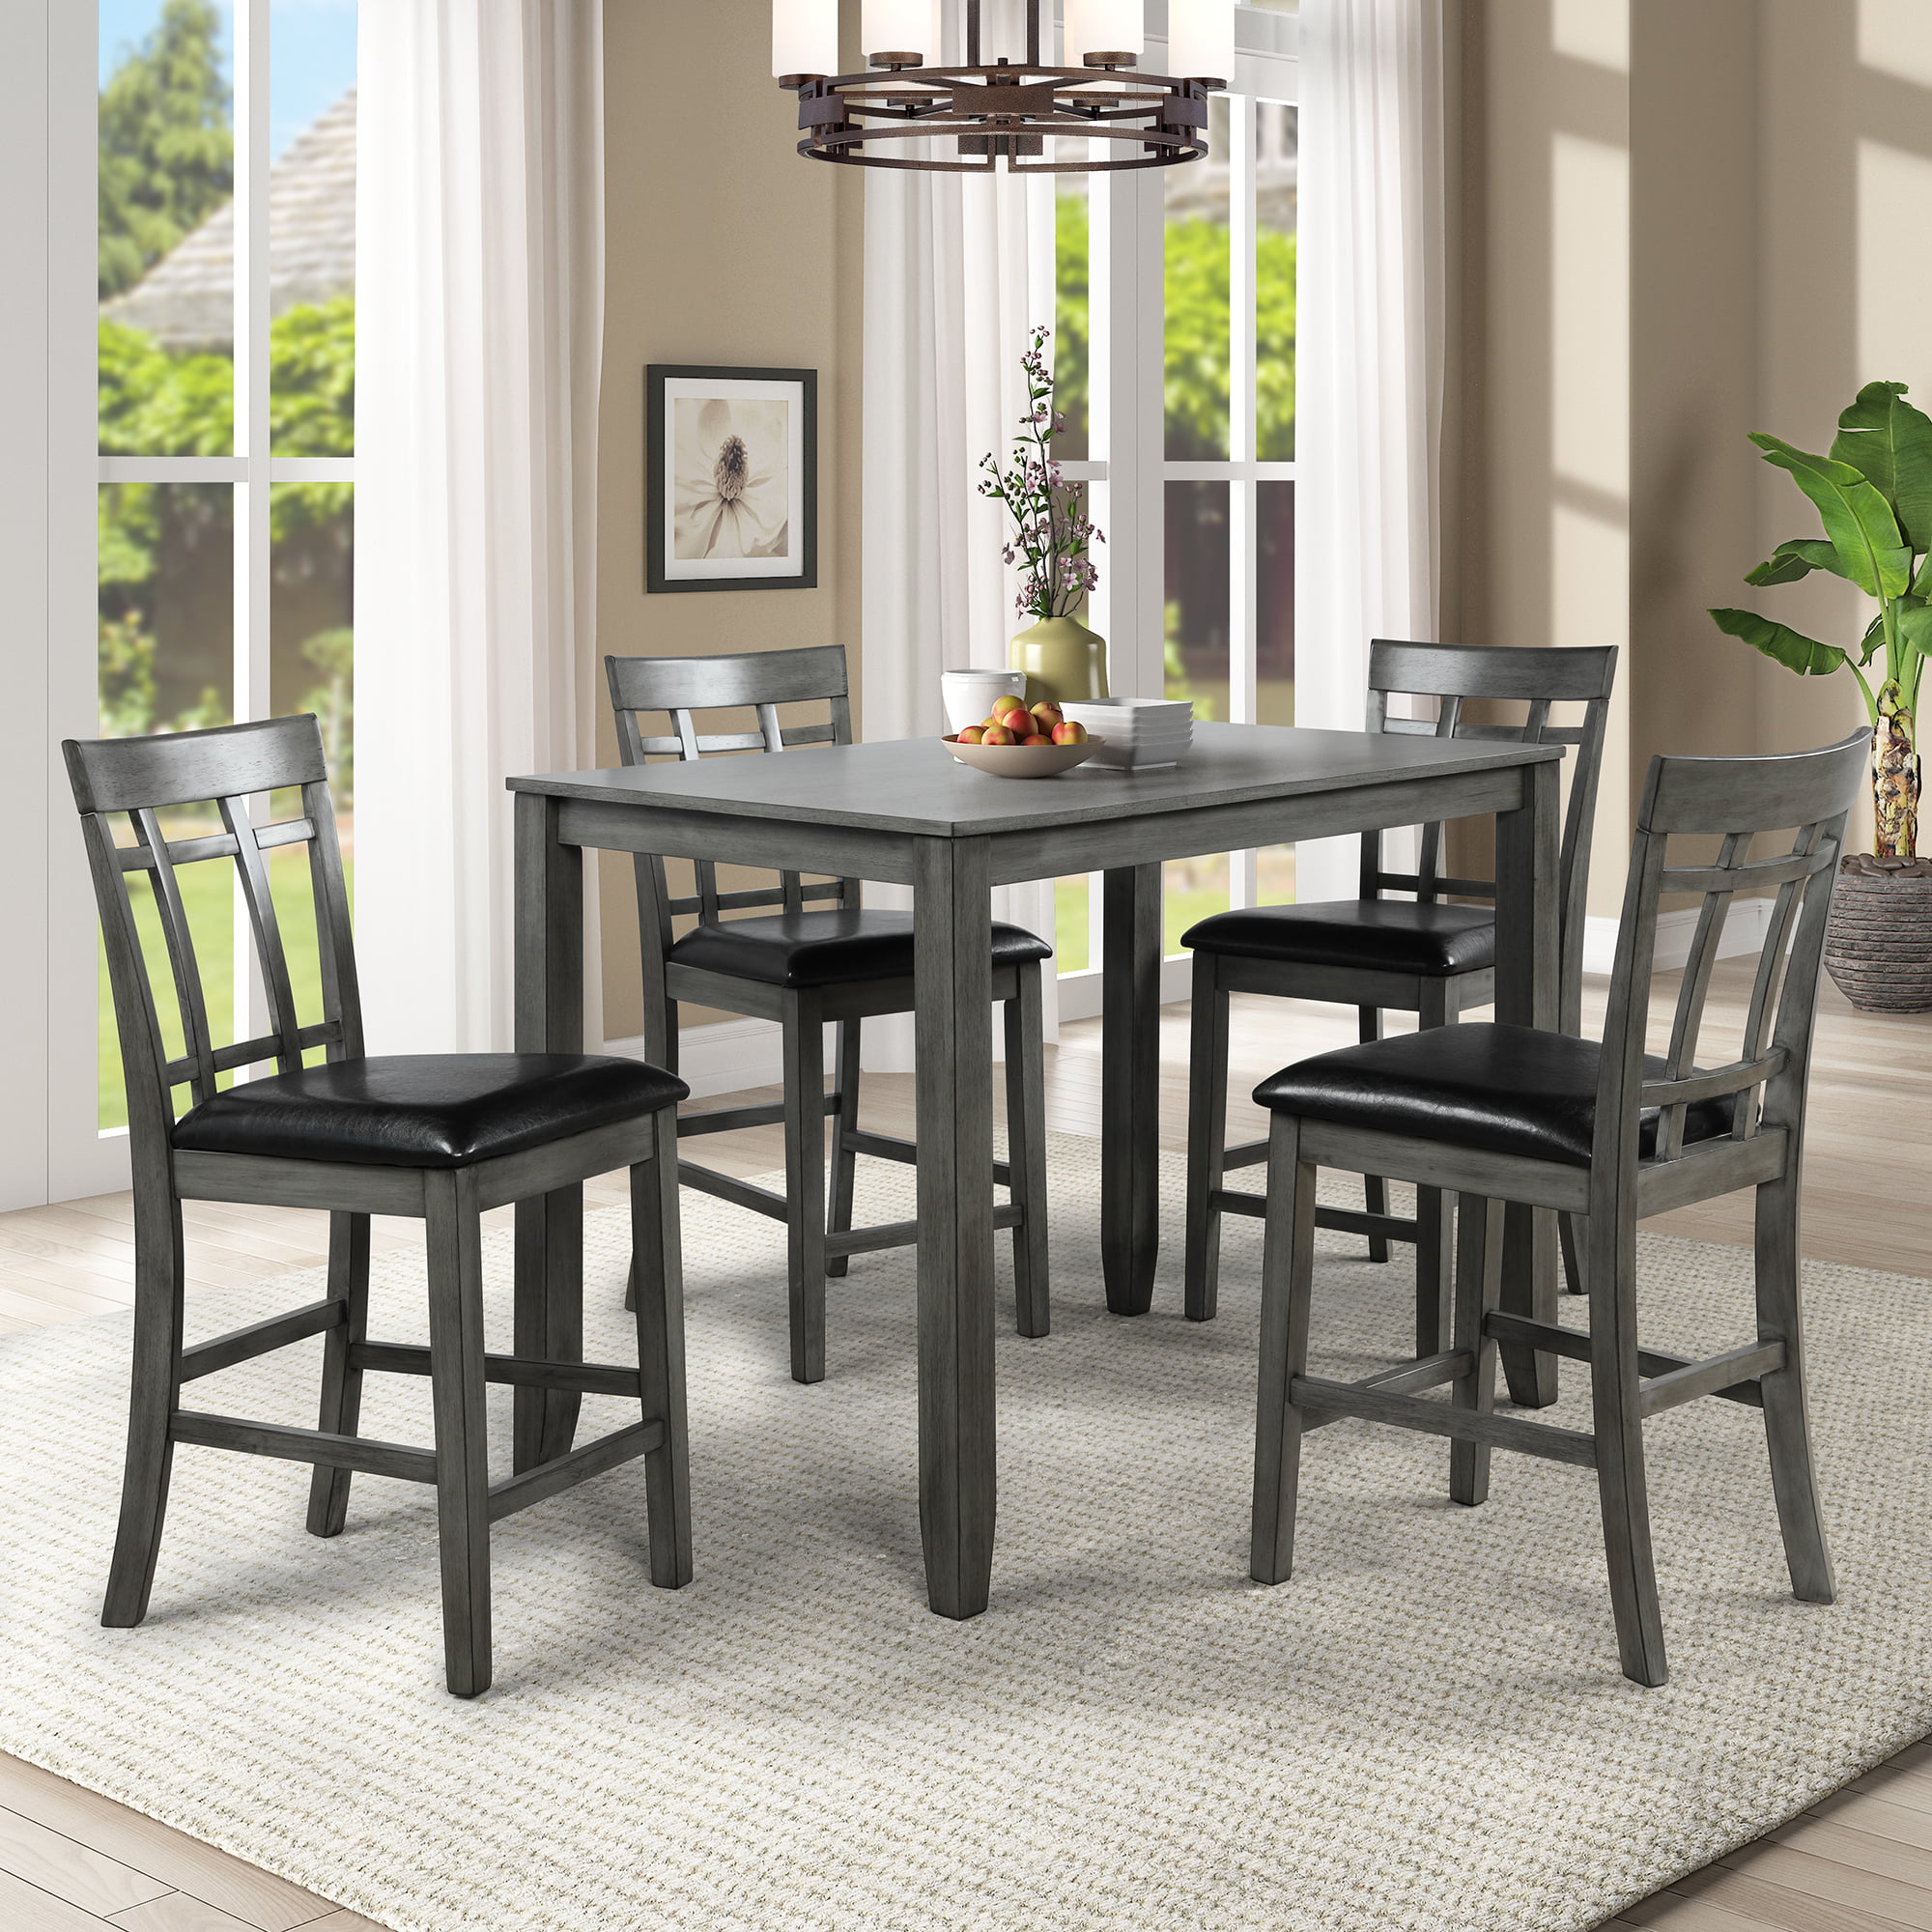 Dining Table Set for 4, BTMWAY 5Piece Solid Wood Kitchen